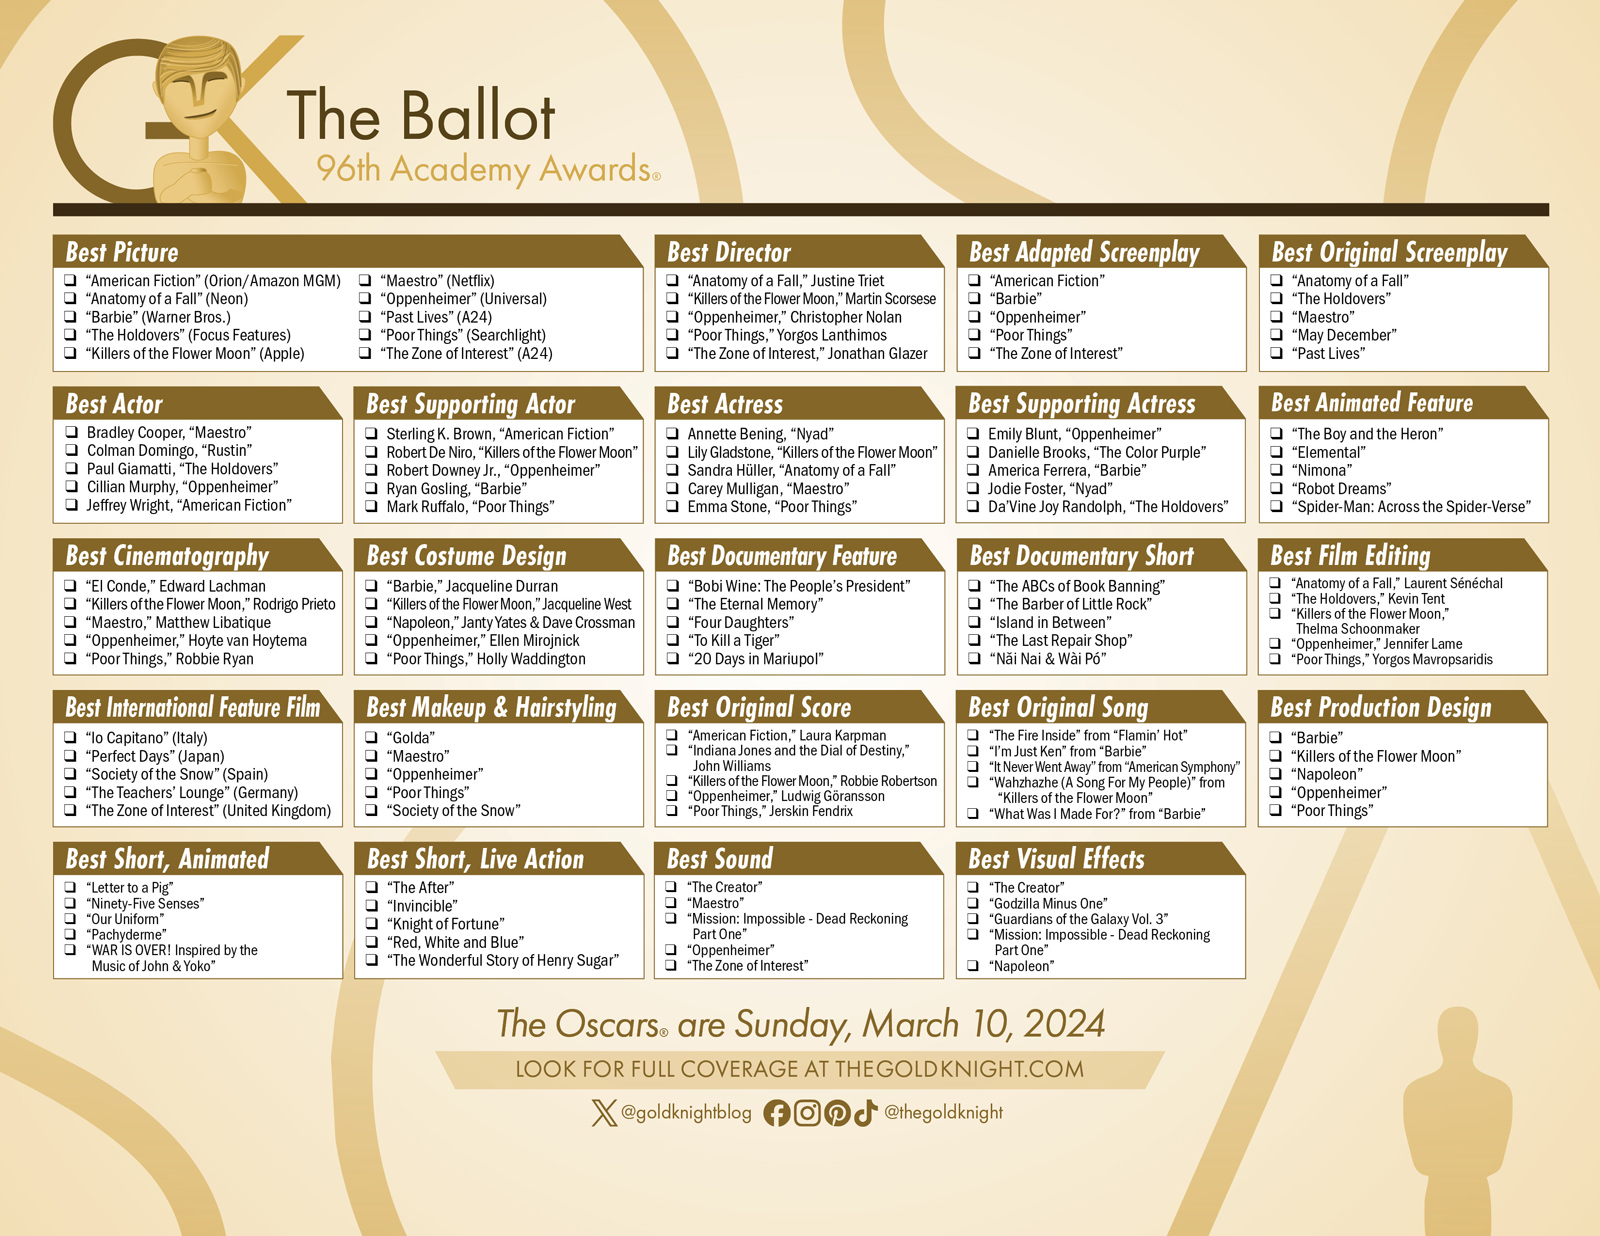 A listing of the 96th Academy Awards nominations in a onepage